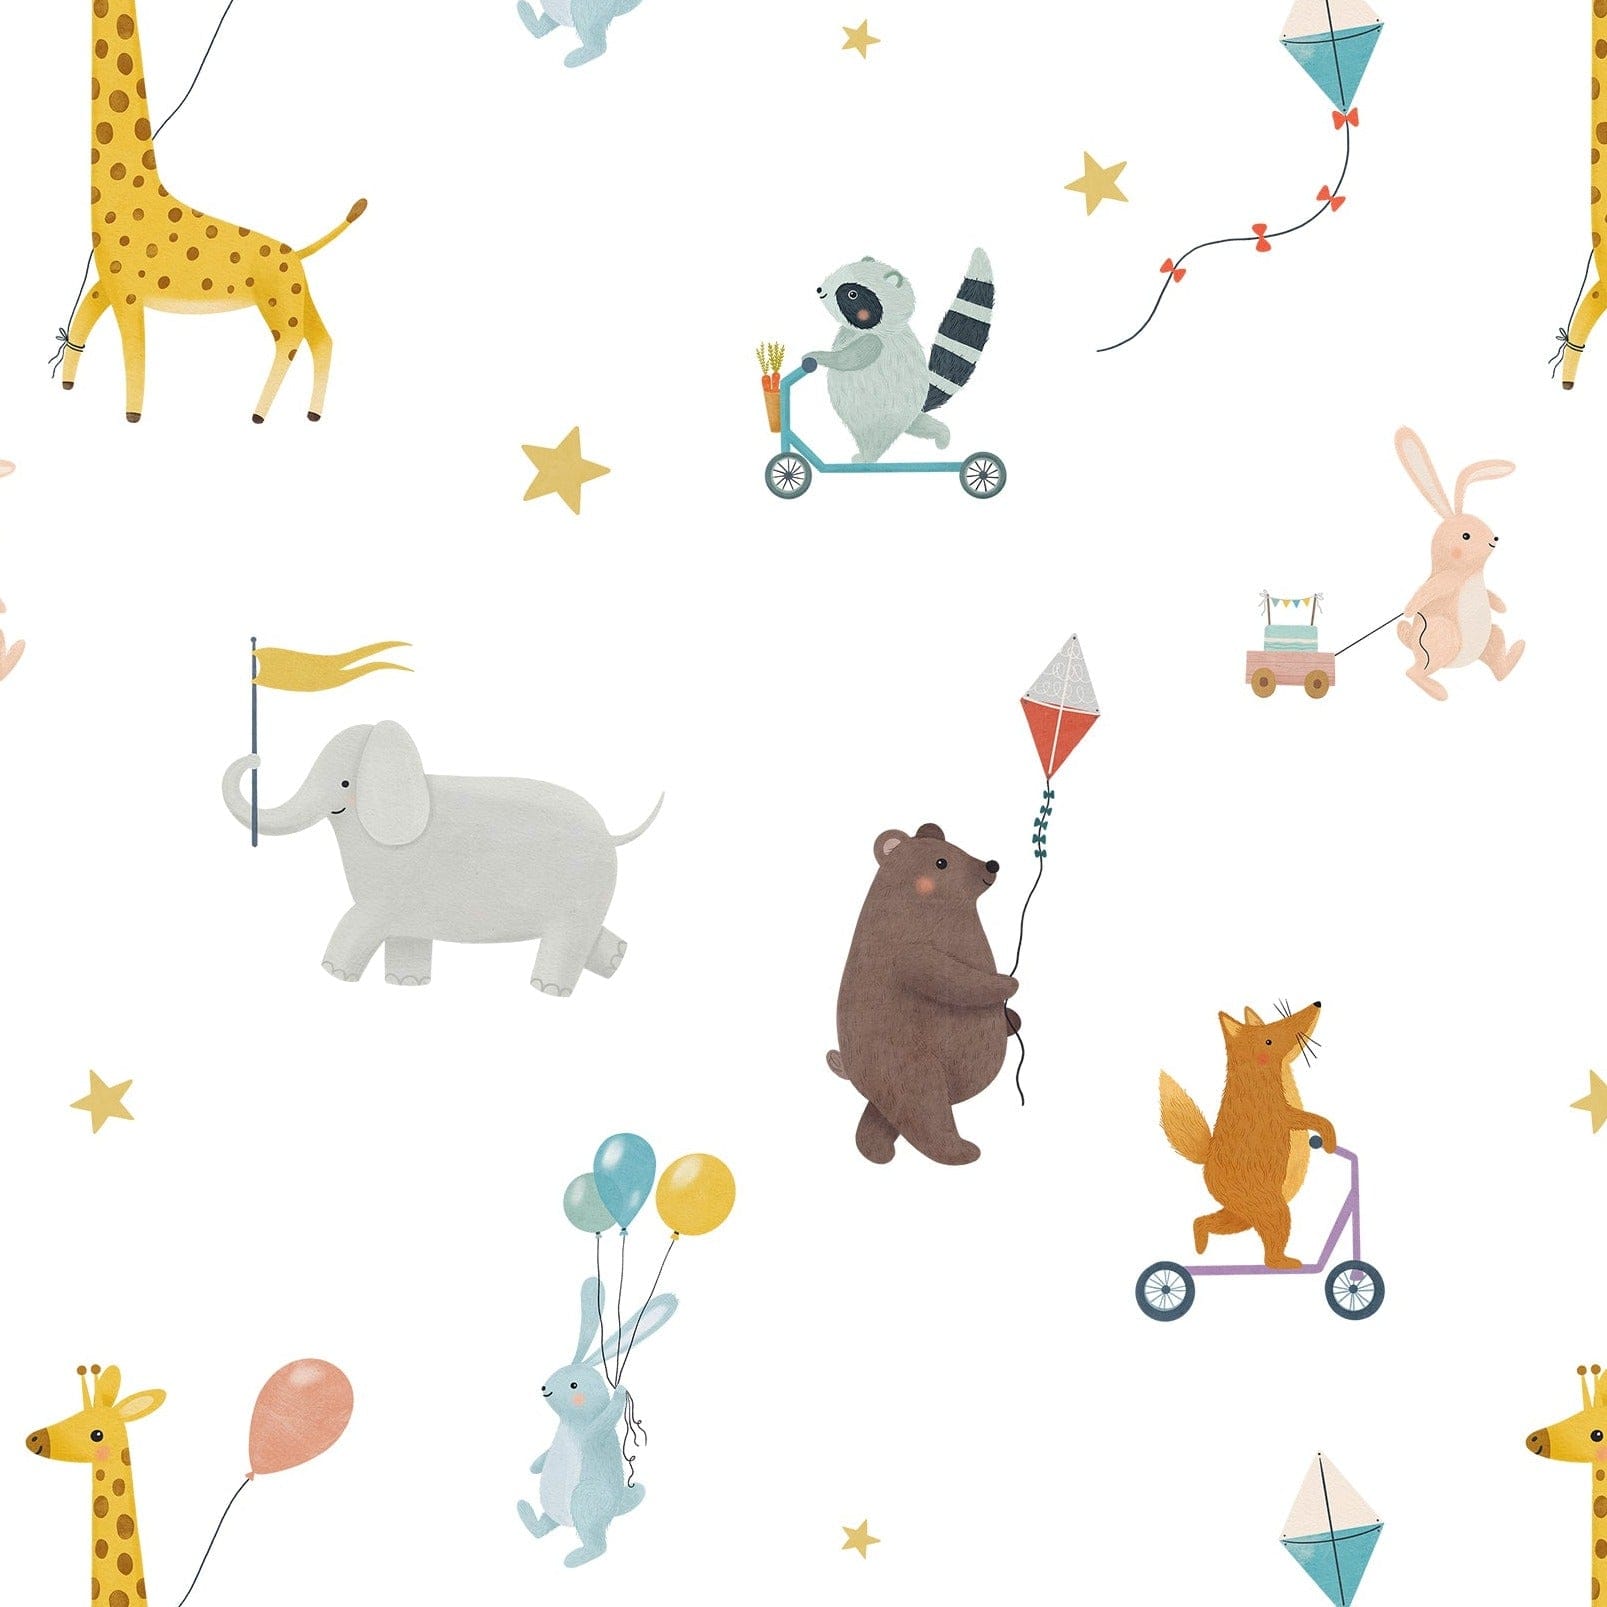 A playful wallpaper pattern featuring various animals engaged in adventurous activities on a white background. Illustrated are bears flying kites, giraffes holding balloons, foxes on scooters, elephants with flags, and other charming scenes interspersed with small golden stars.